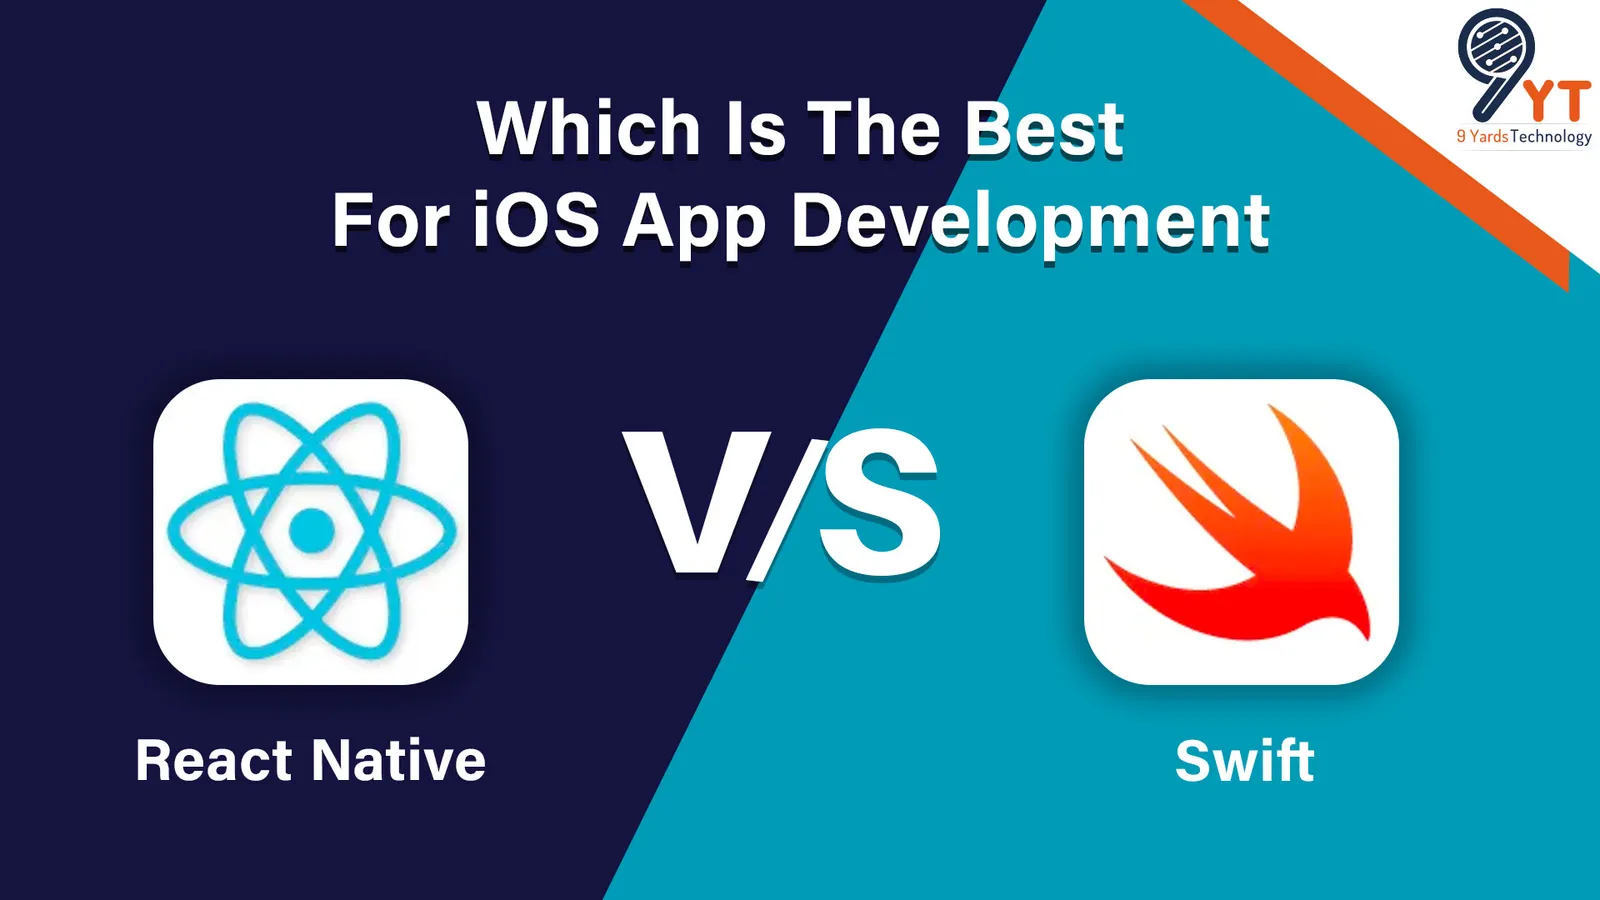  Which Is The Best for iOS App Development - React Native VS Swift?